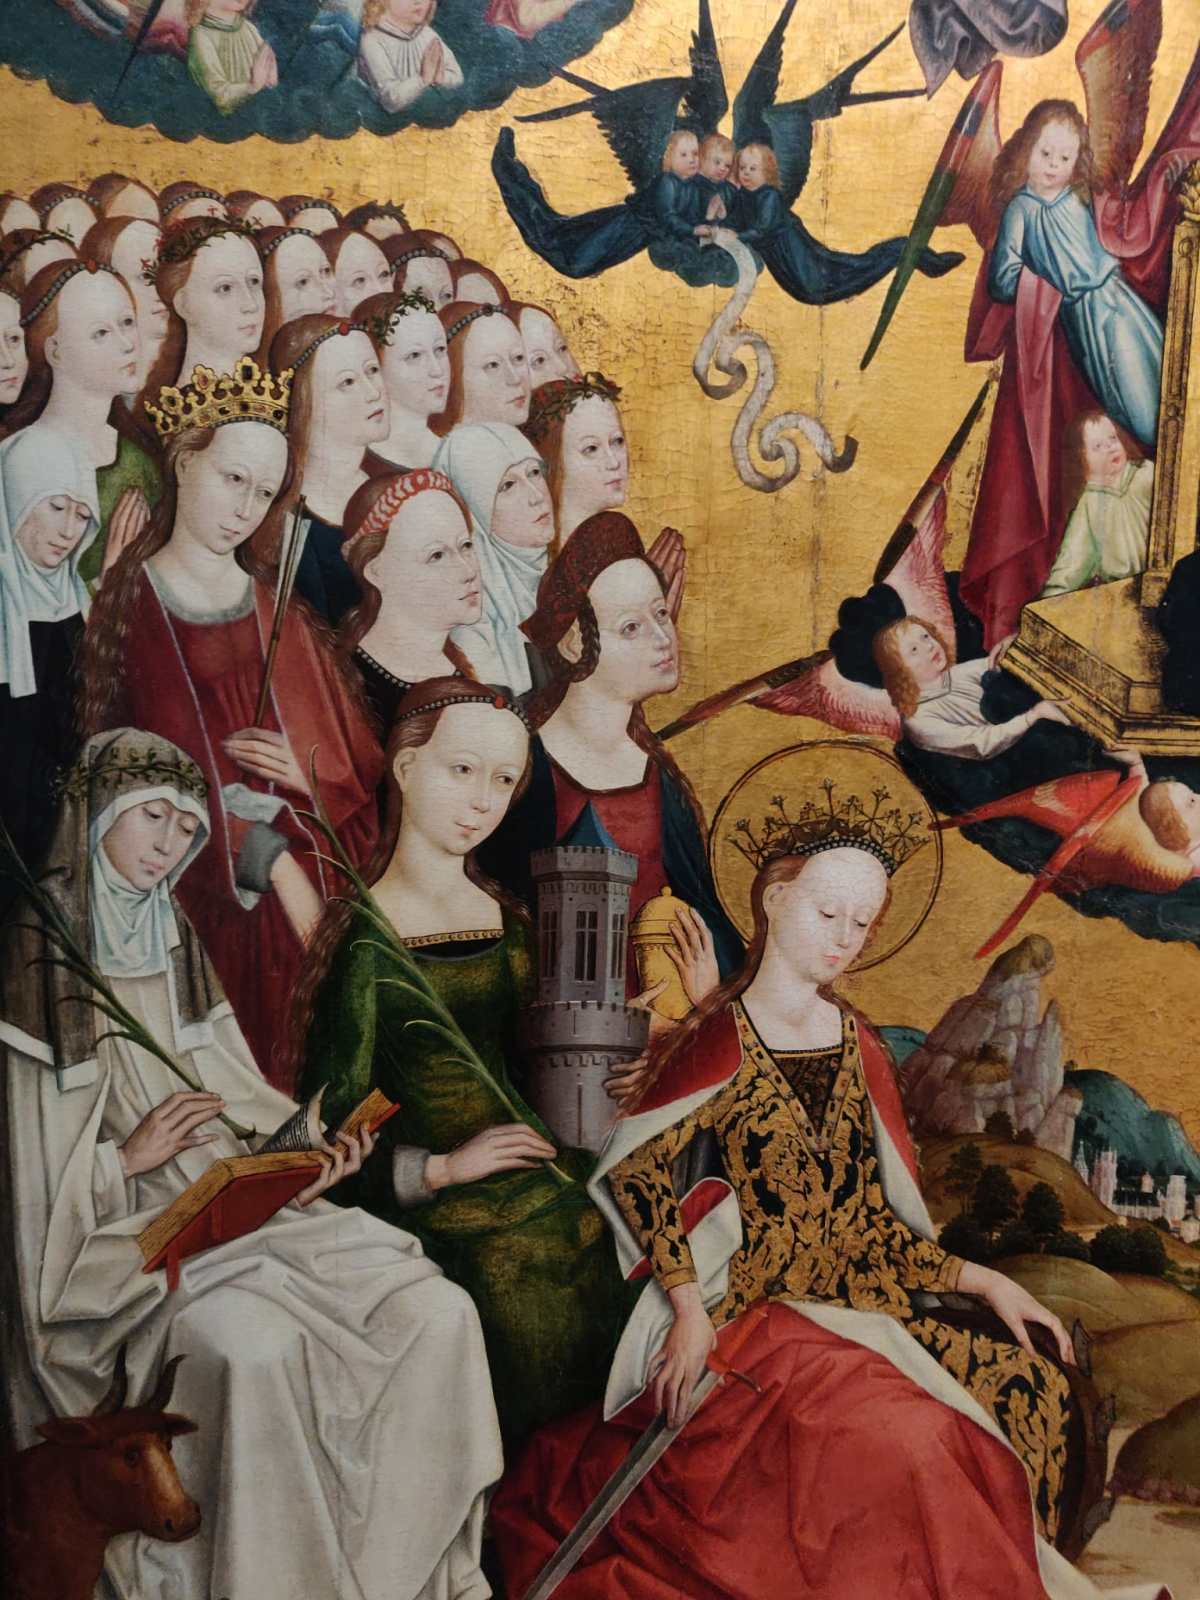 On the 11,000 virgin martyrs, iconography, and beauty standards